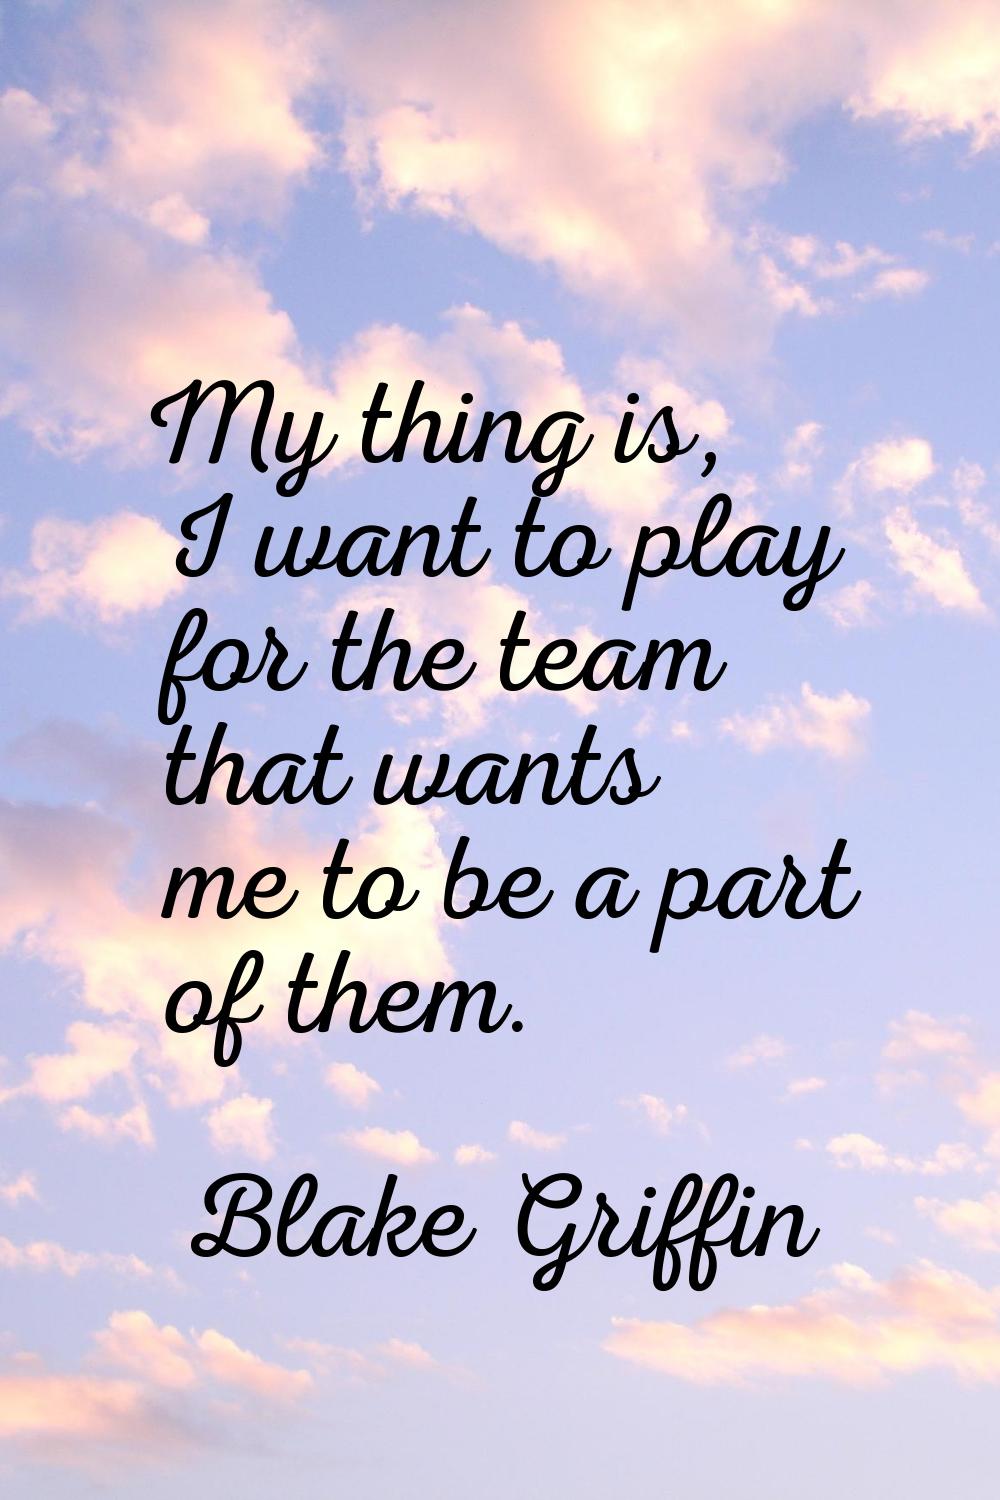 My thing is, I want to play for the team that wants me to be a part of them.